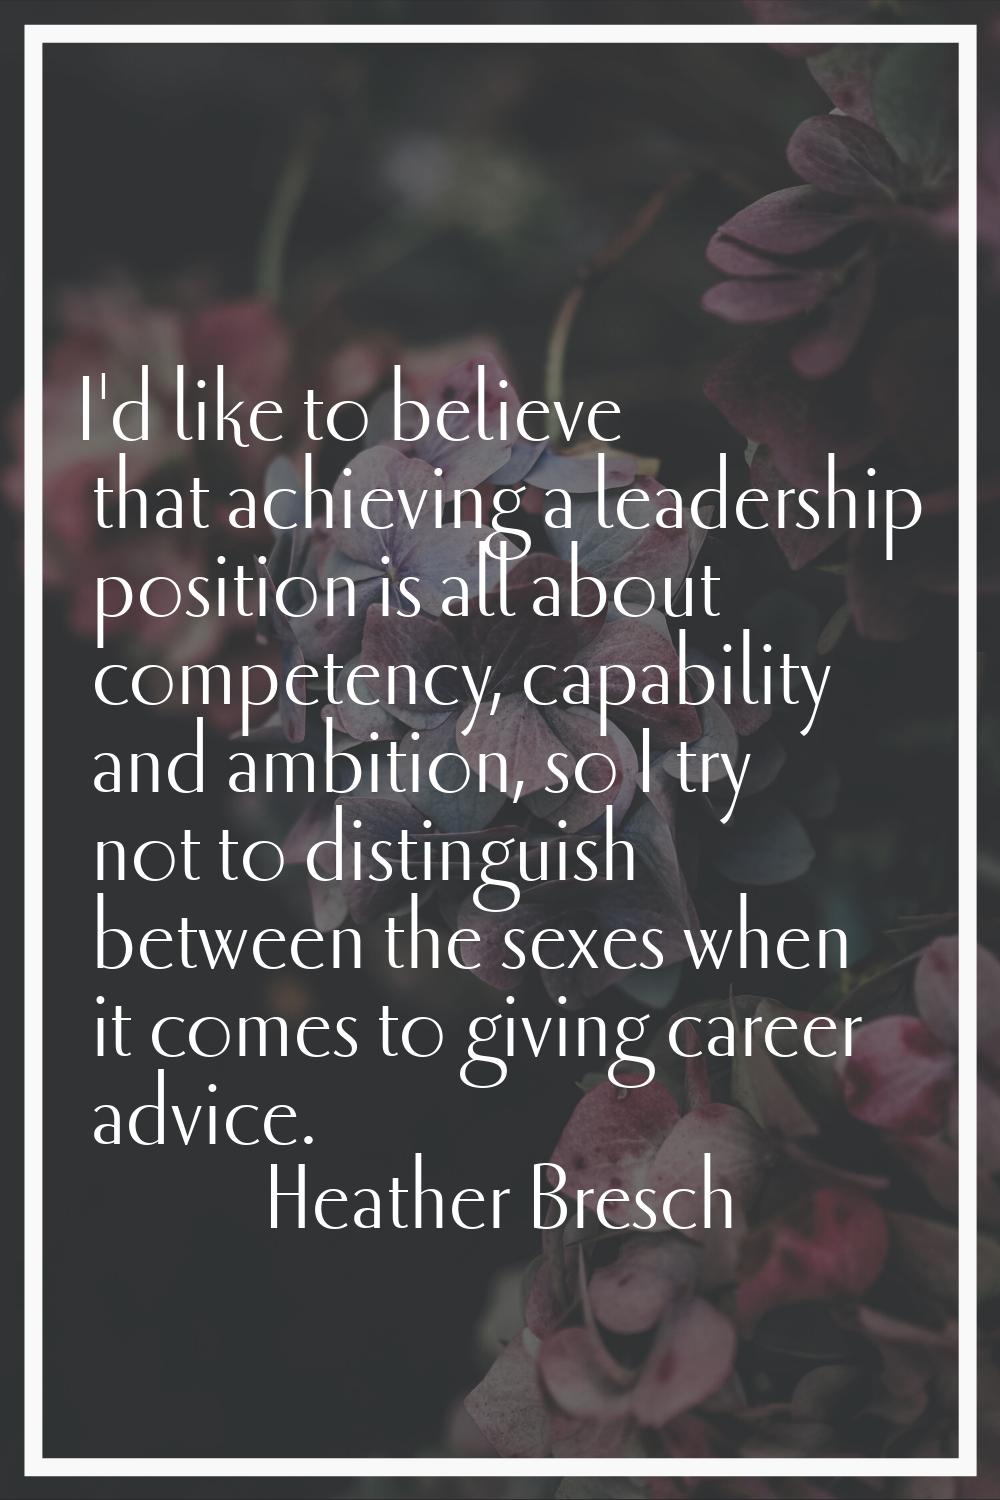 I'd like to believe that achieving a leadership position is all about competency, capability and am